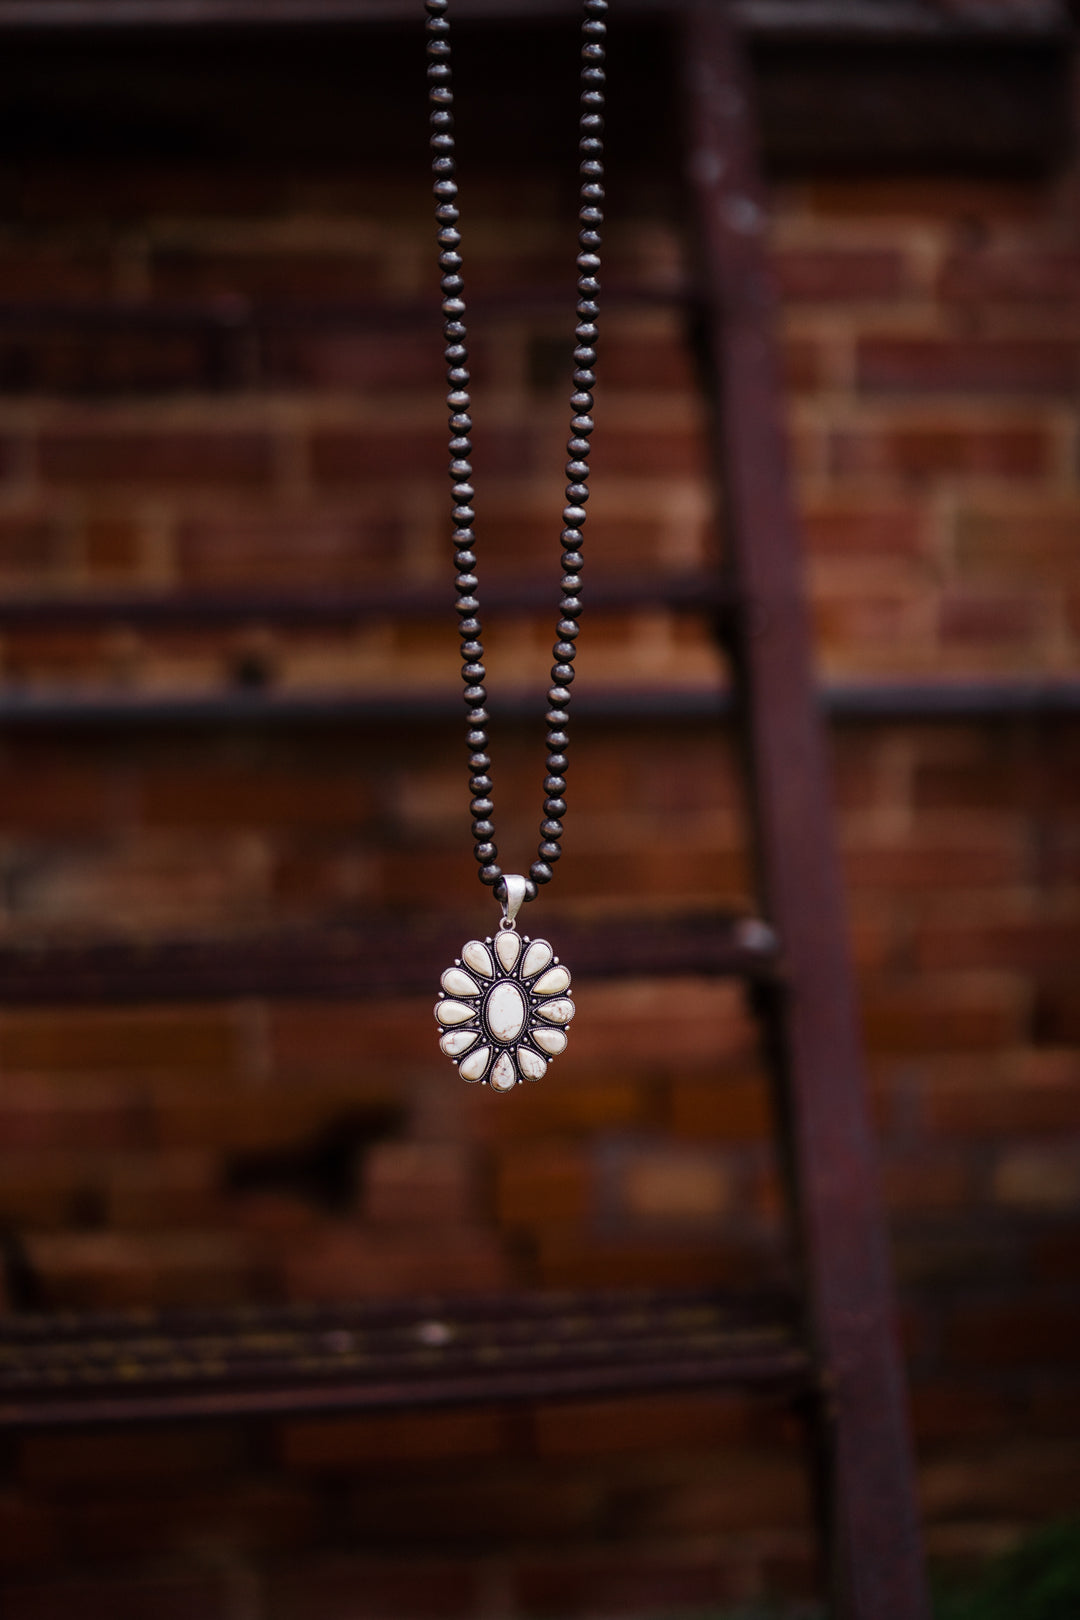 Gone Again Necklace - Middle West Apparel